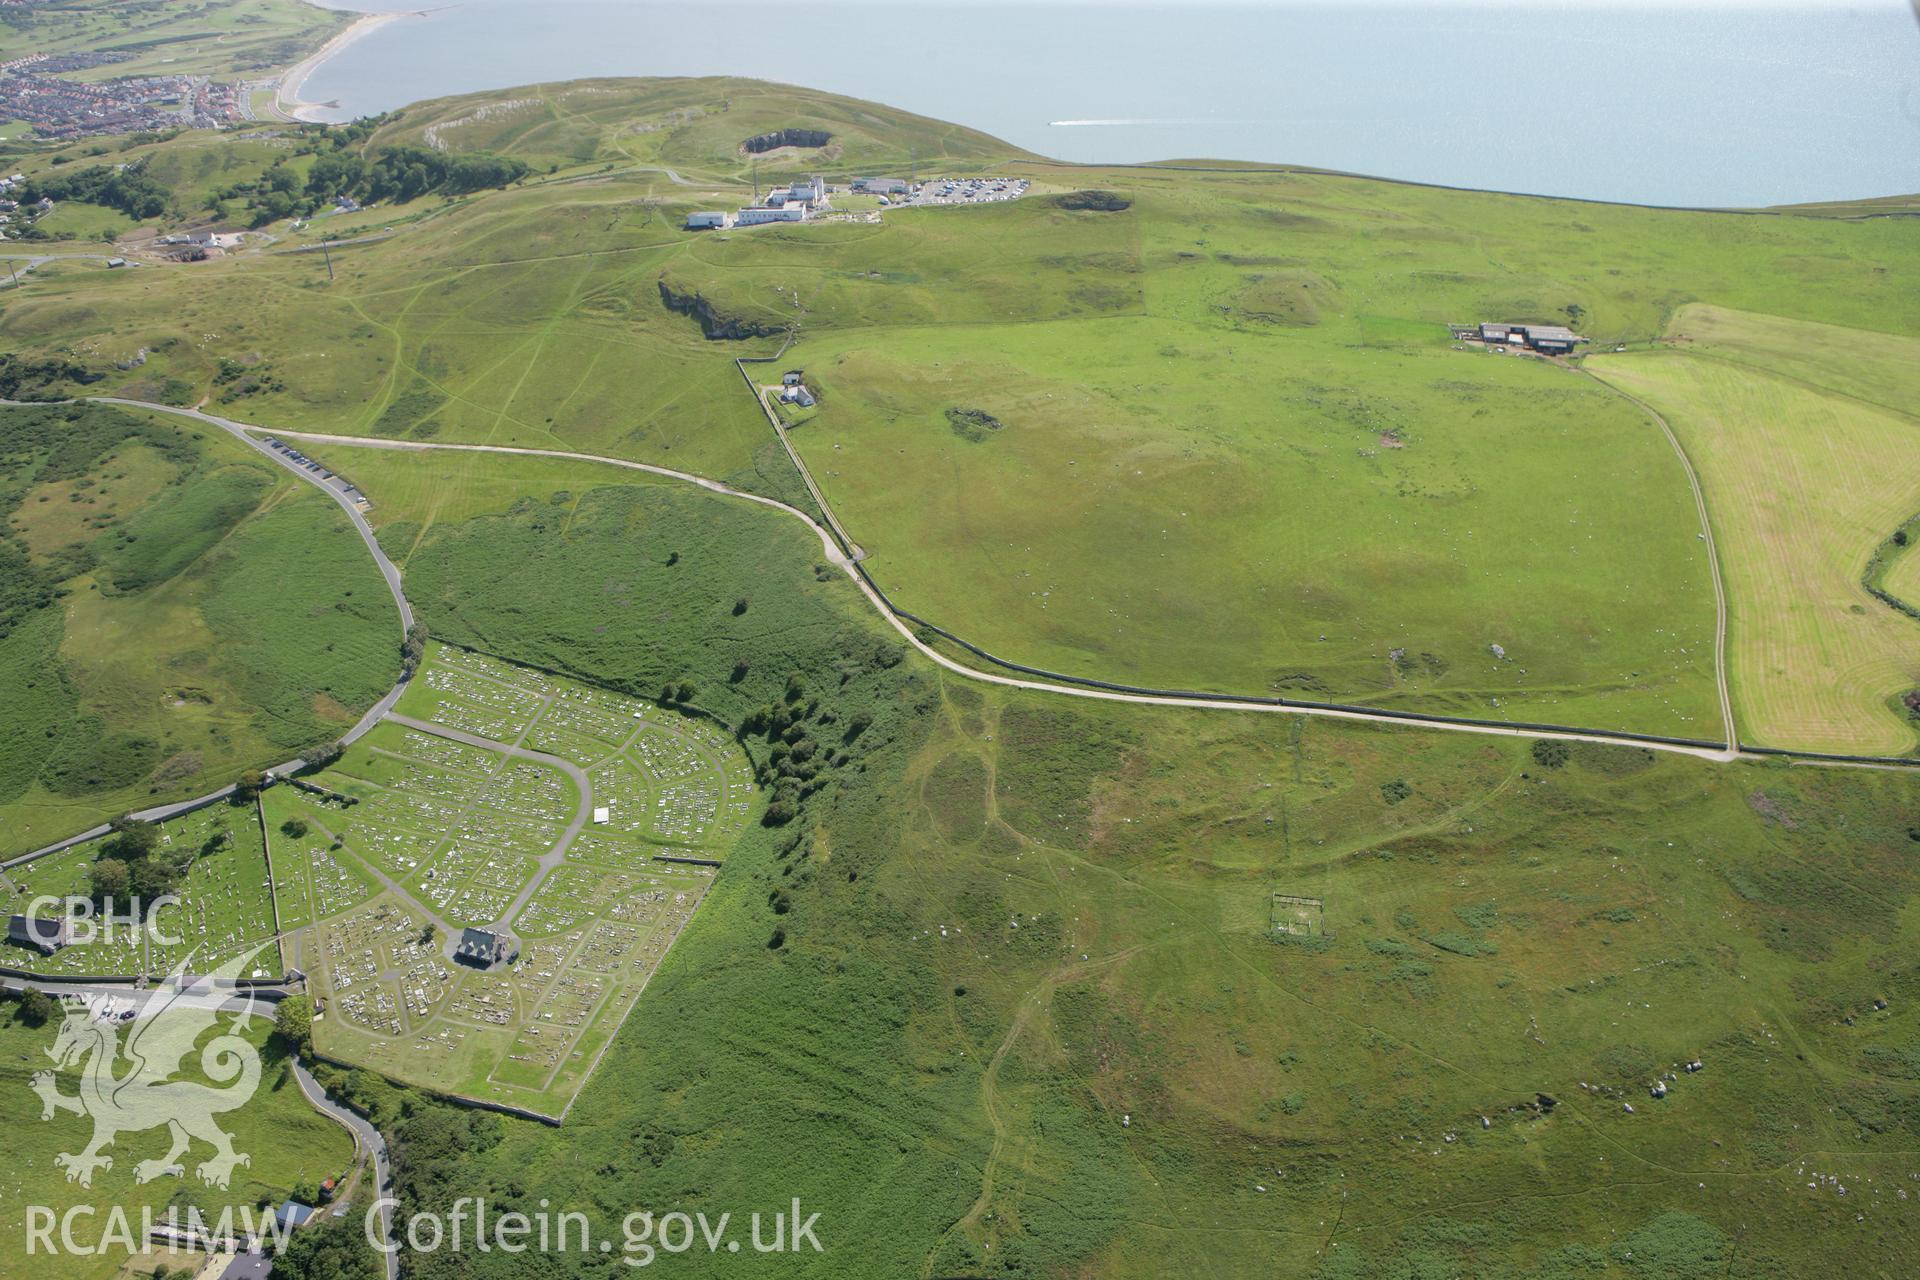 RCAHMW colour oblique photograph of Hwylfa'r Ceirw, deserted rural settlement. Taken by Toby Driver on 20/07/2011.